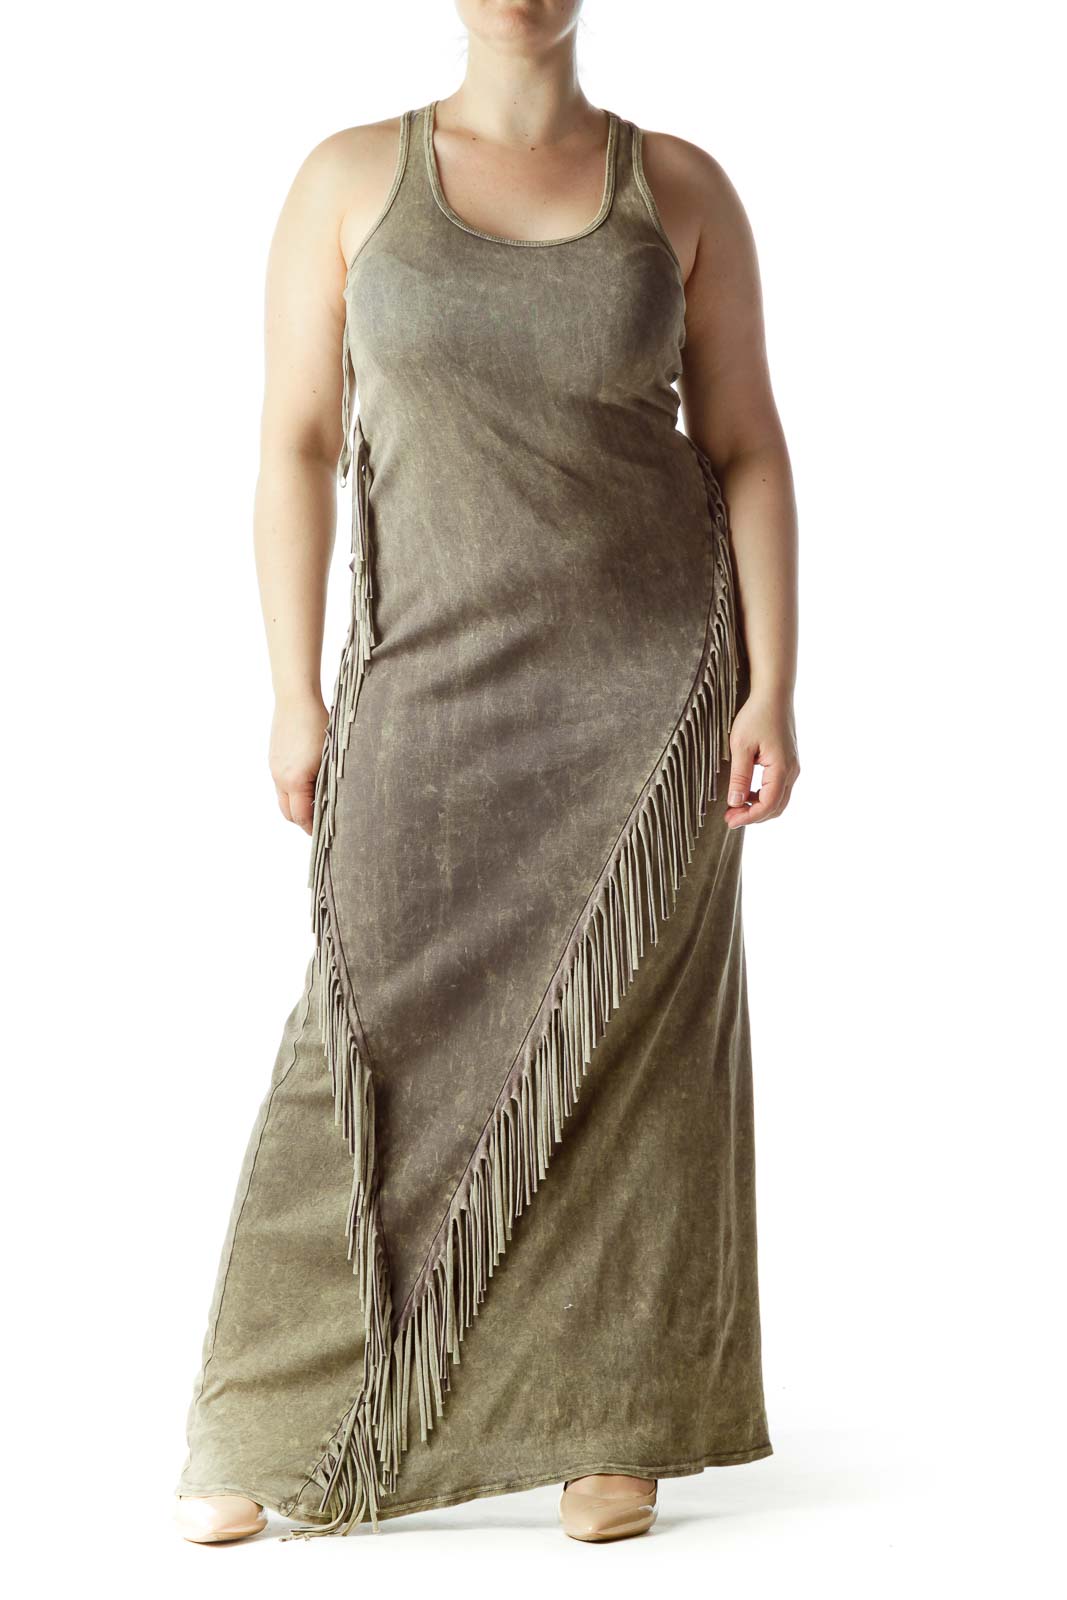 Military Gray and Green Fringe Maxi Dress Front